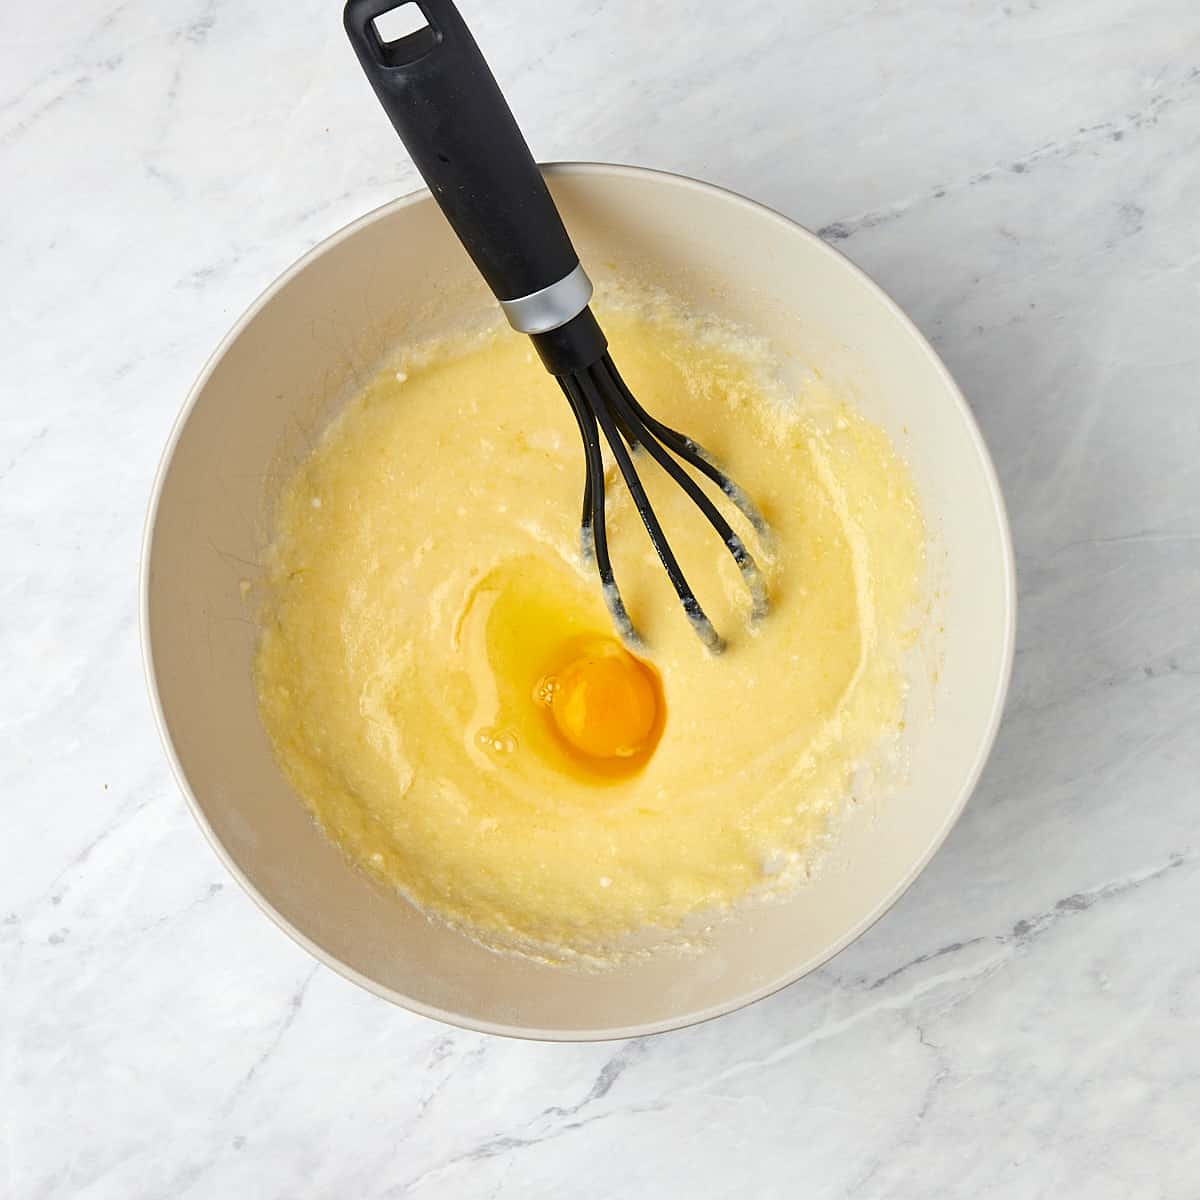 eggs being added one at a time into the cake batter.